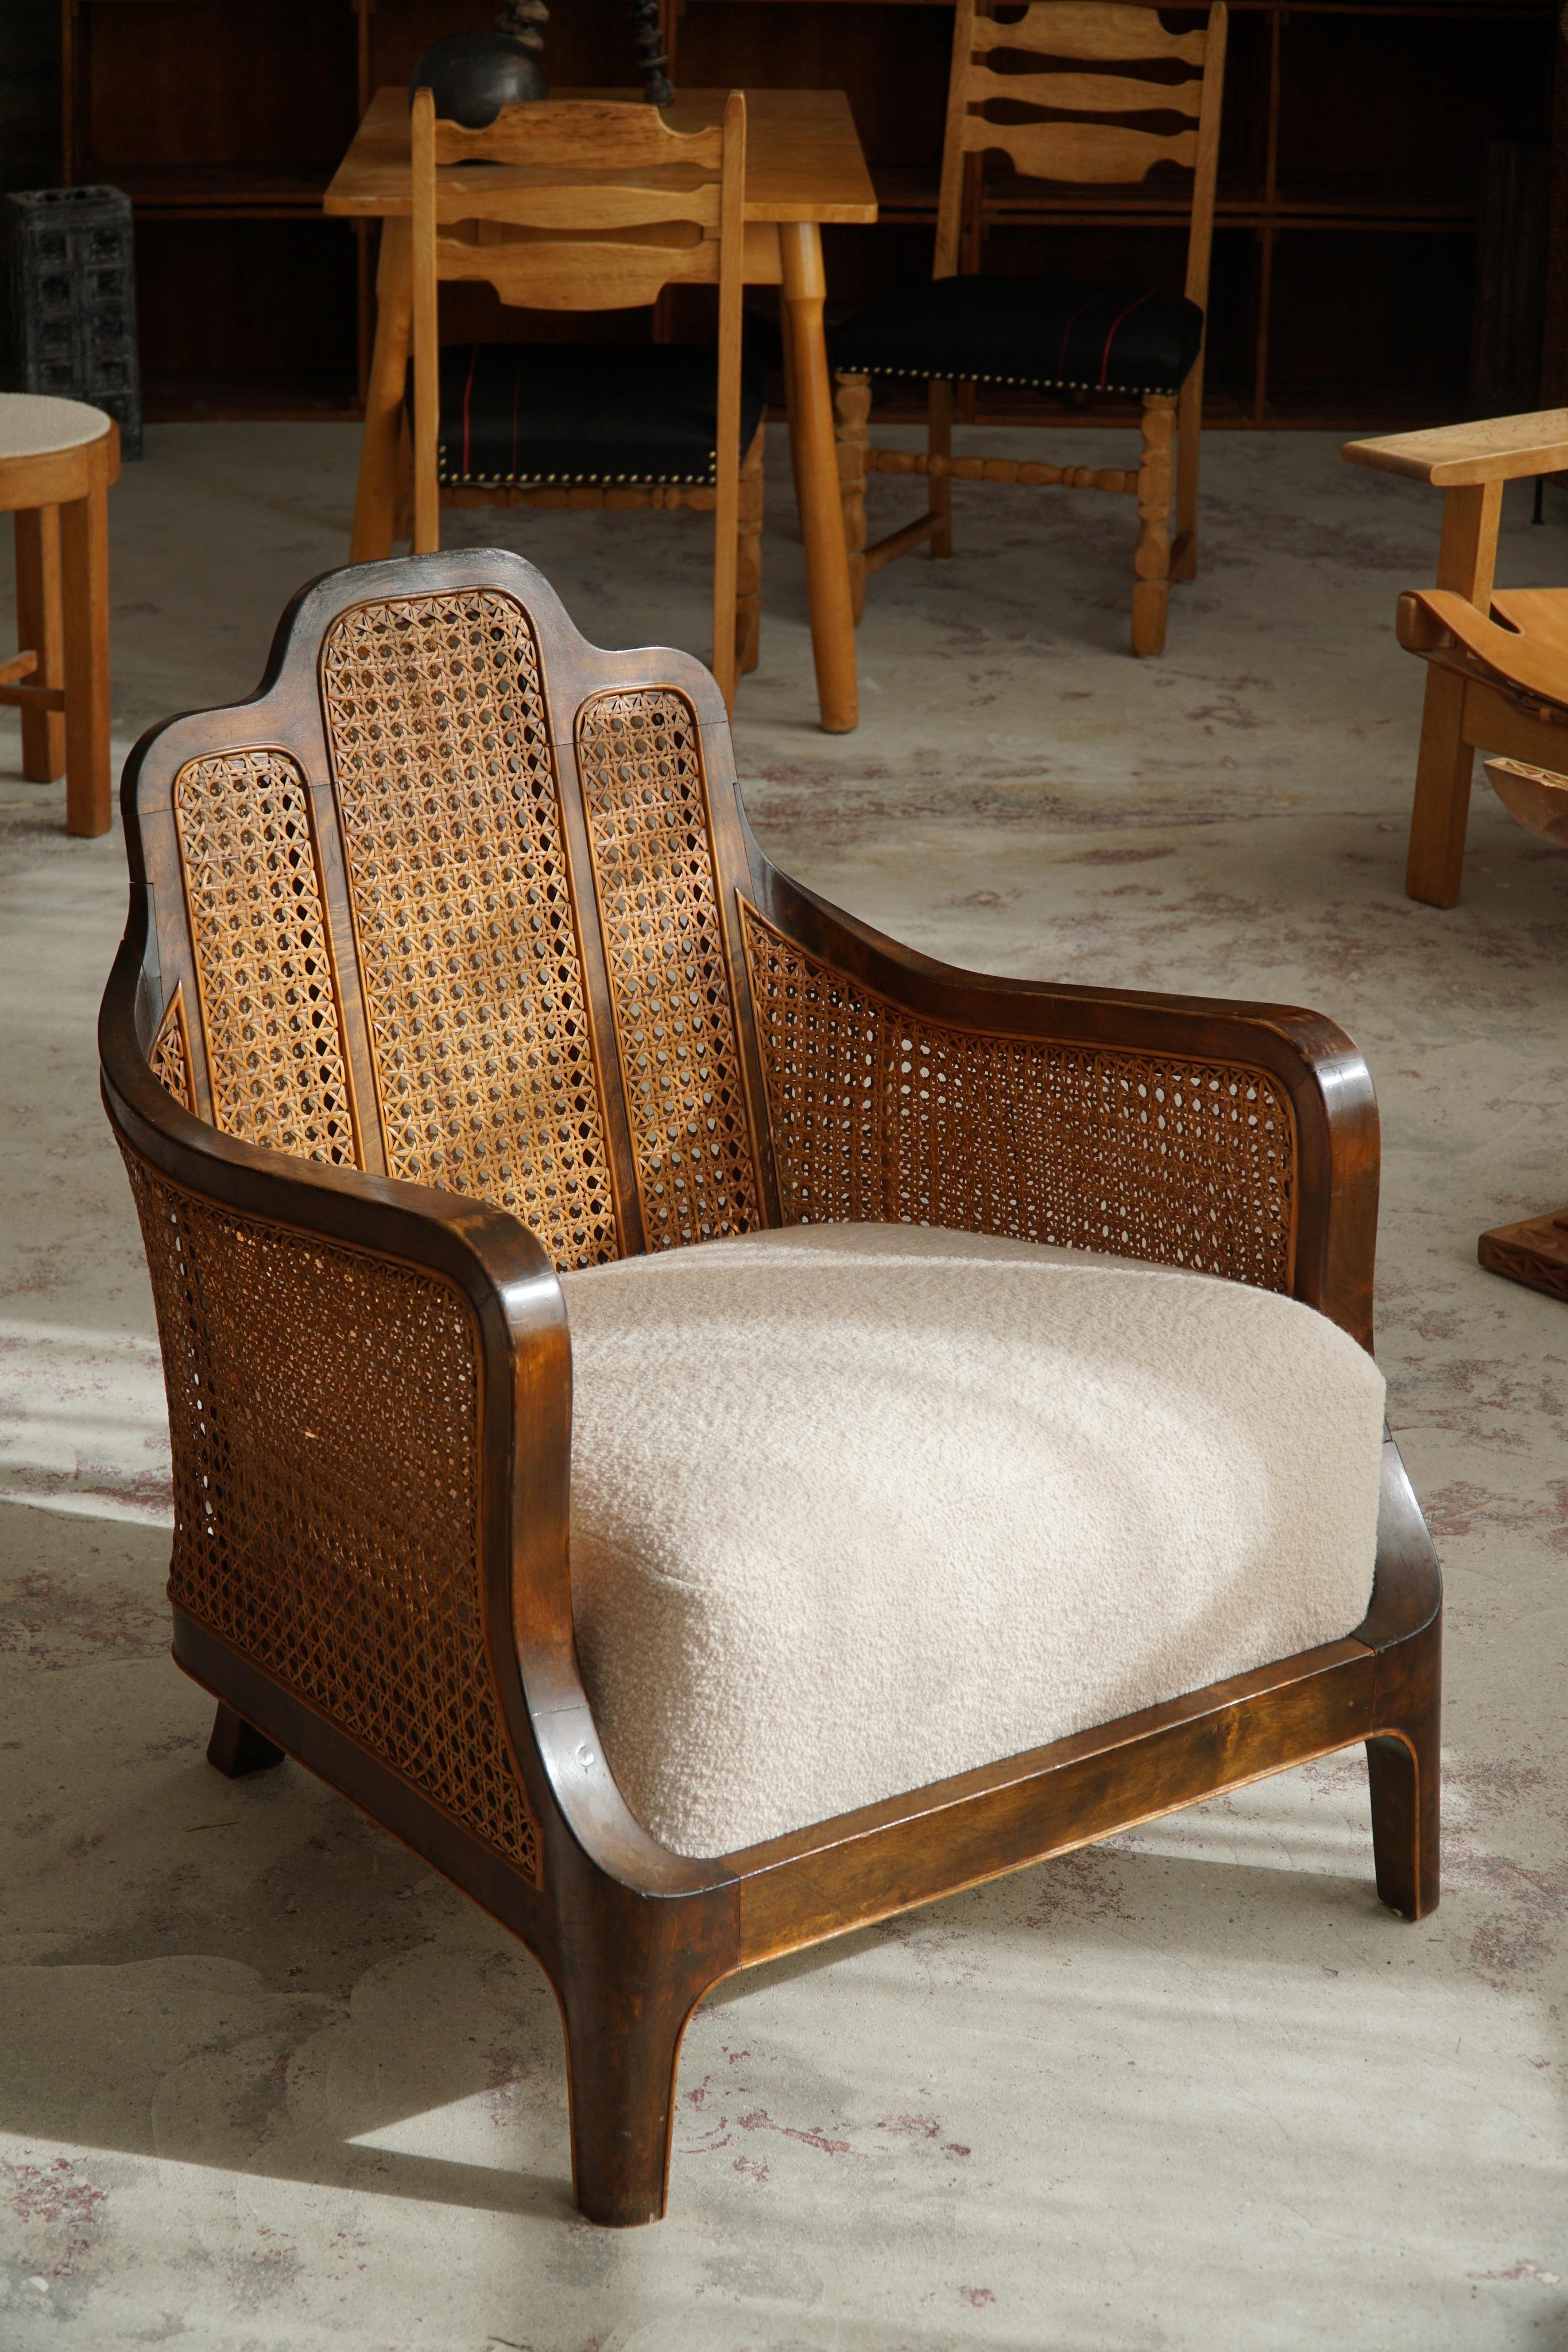 Antique 19th Century Lounge Chair in Rattan, Bouclé & Beech, British Colonial 15